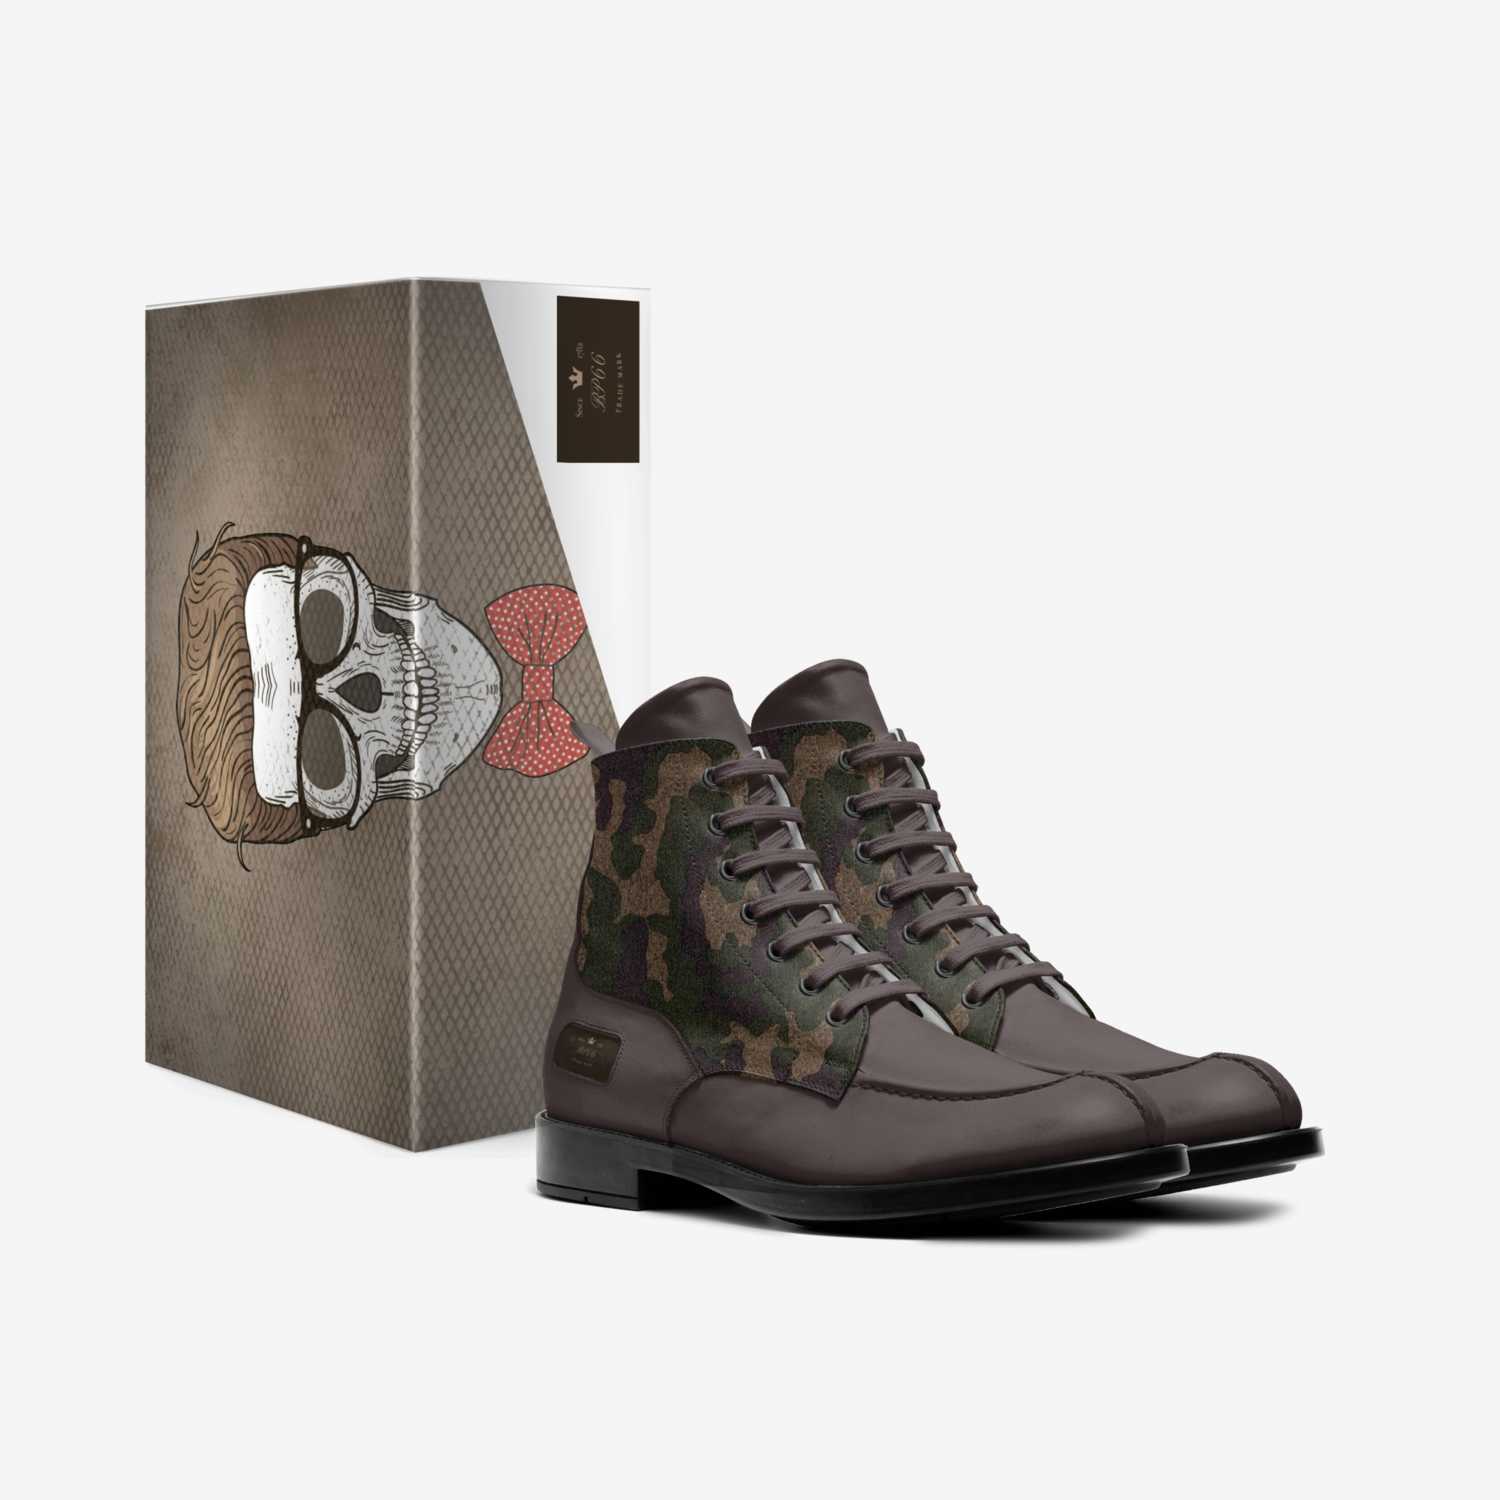 BP66 custom made in Italy shoes by Bill Porter | Box view